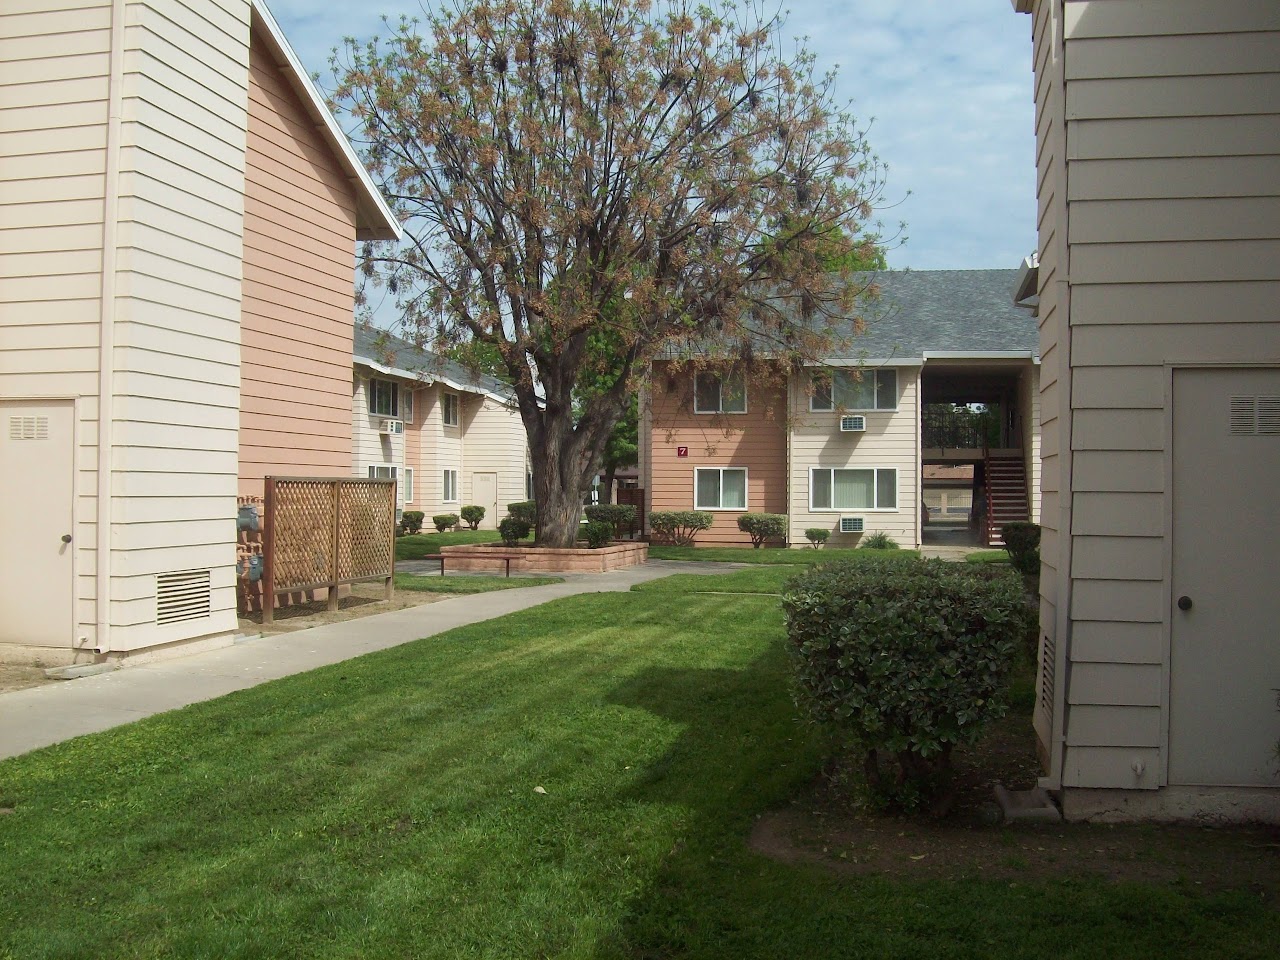 Photo of TULE VISTA. Affordable housing located at 552 W ALPINE PL TULARE, CA 93274